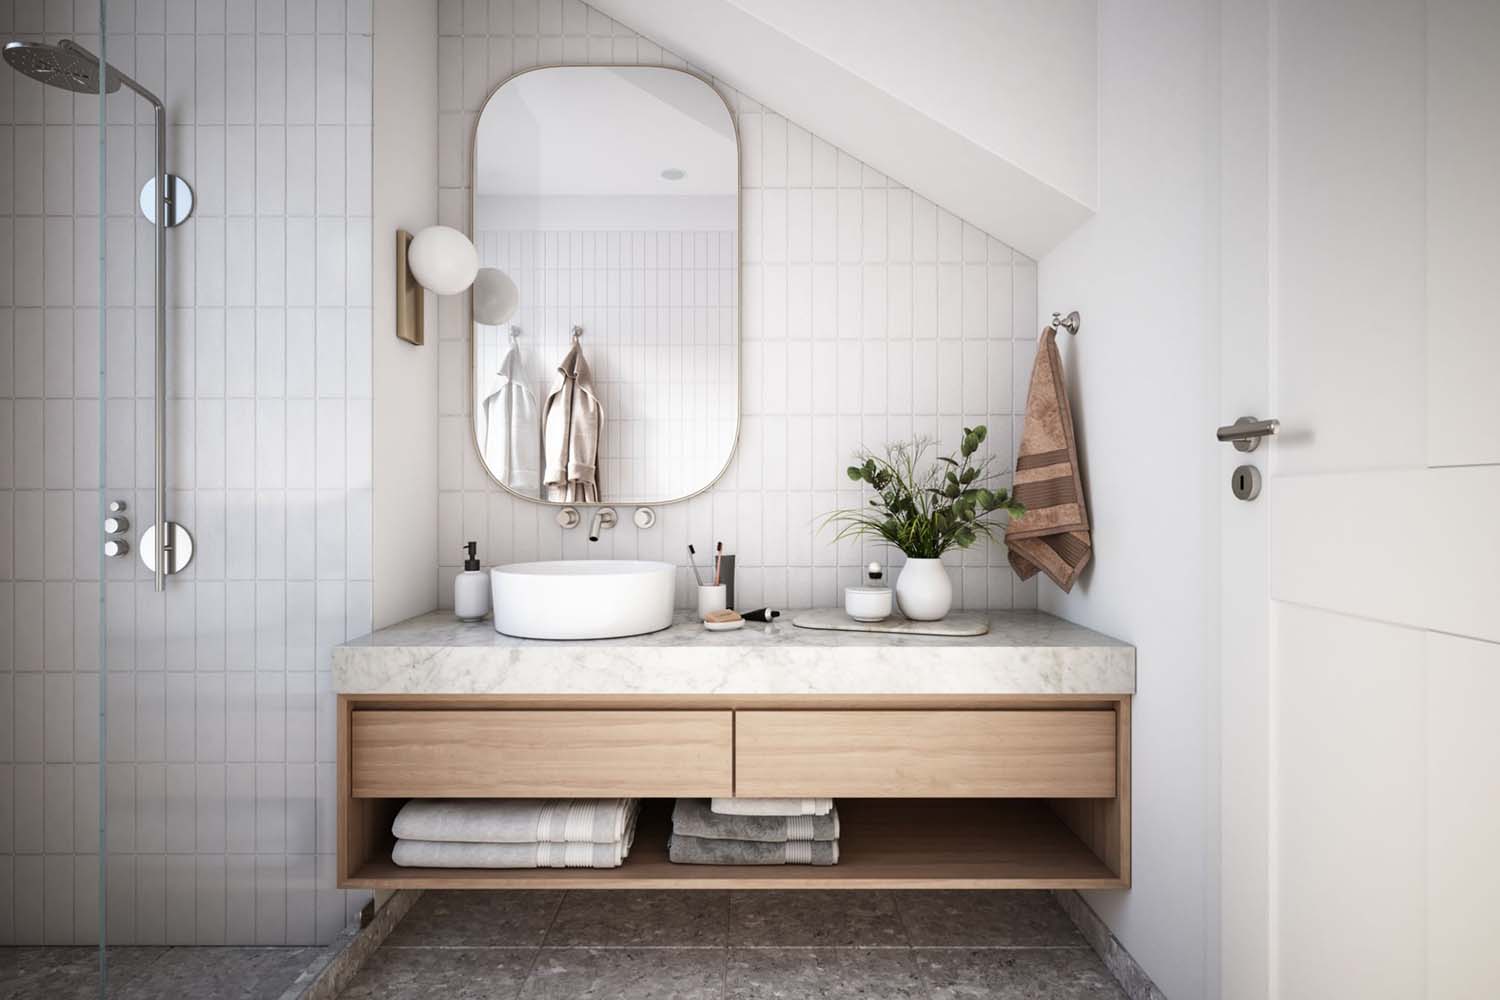 Tips and Tricks To Make a Small Bathroom Feel Bigger